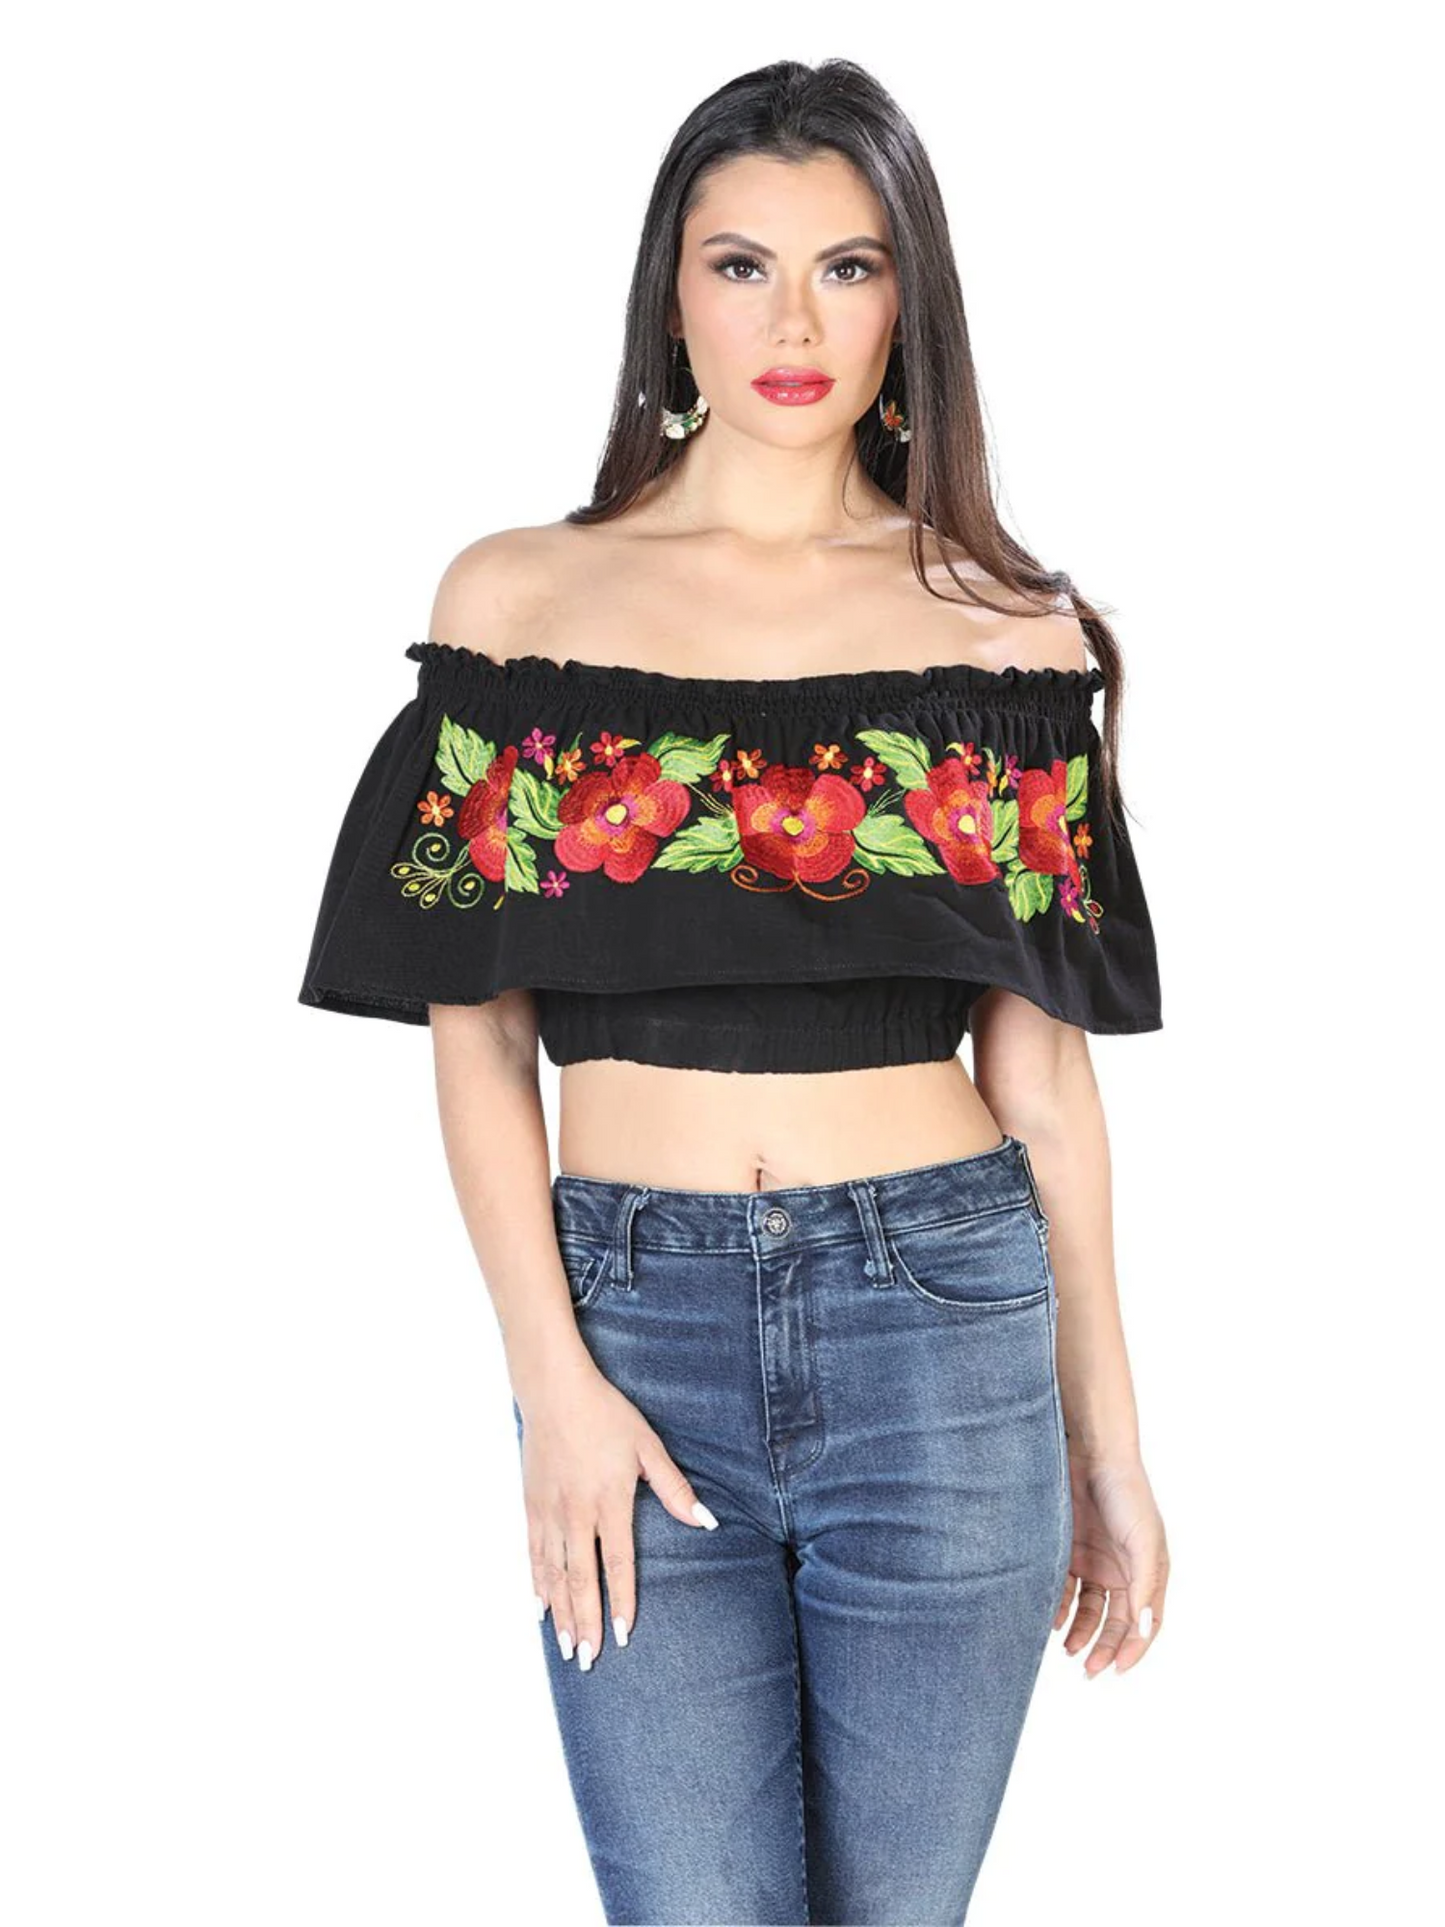 Olan Artisanal Short Blouse Embroidered with Flowers for Women Handmade Crop Top Mexico Artesanal Black